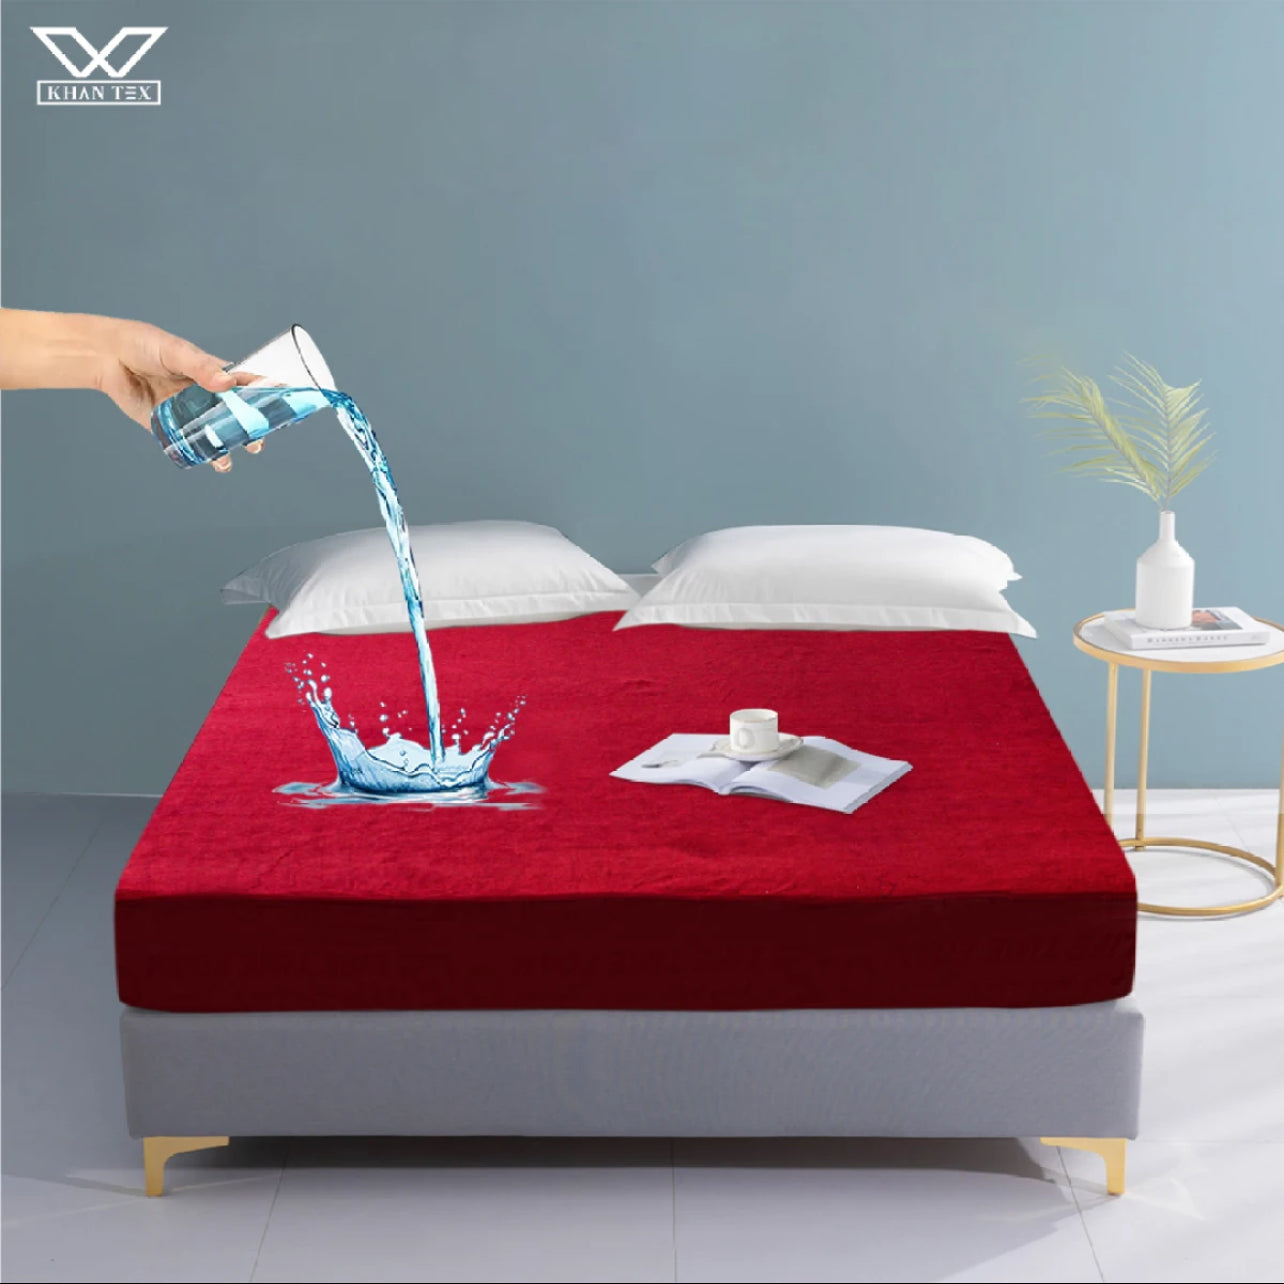 Royal Waterproof Mattress Cover For Double Bed King Size